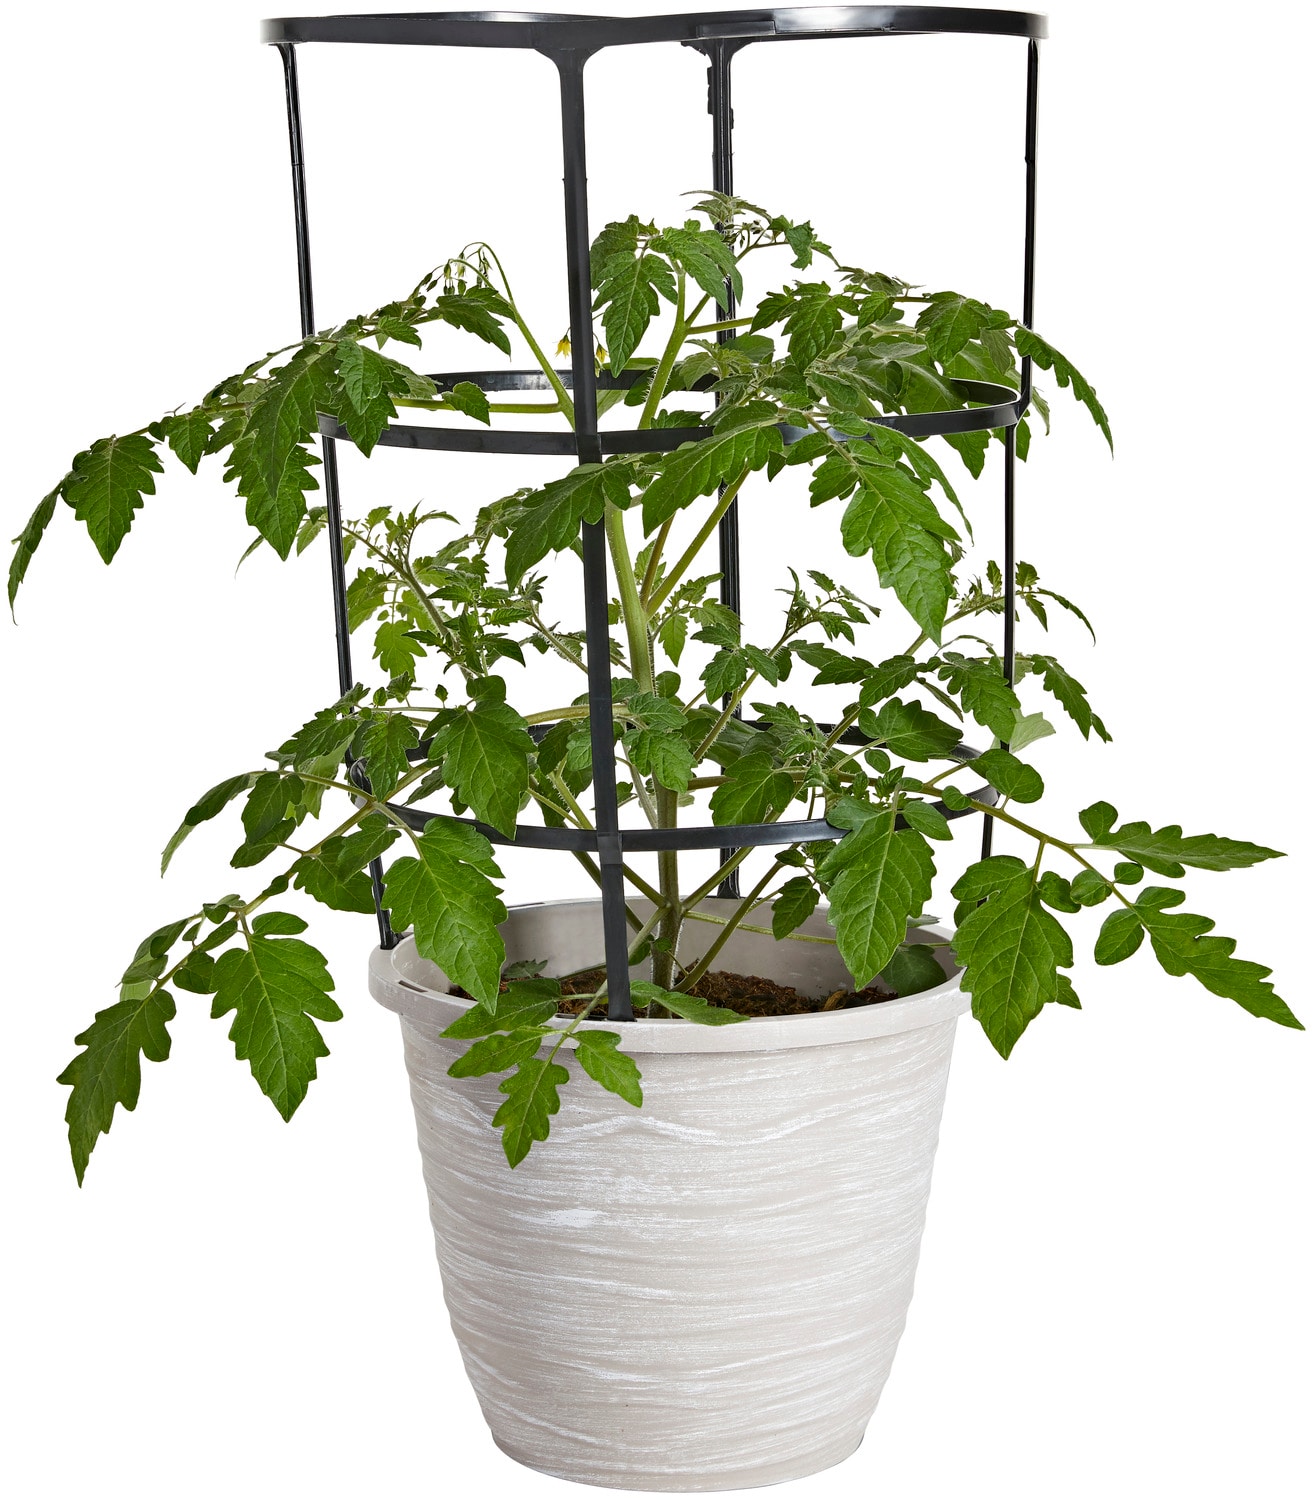 Fourth of July Tomato (Spring Pre-Order) 4.5 Pot - Burpee